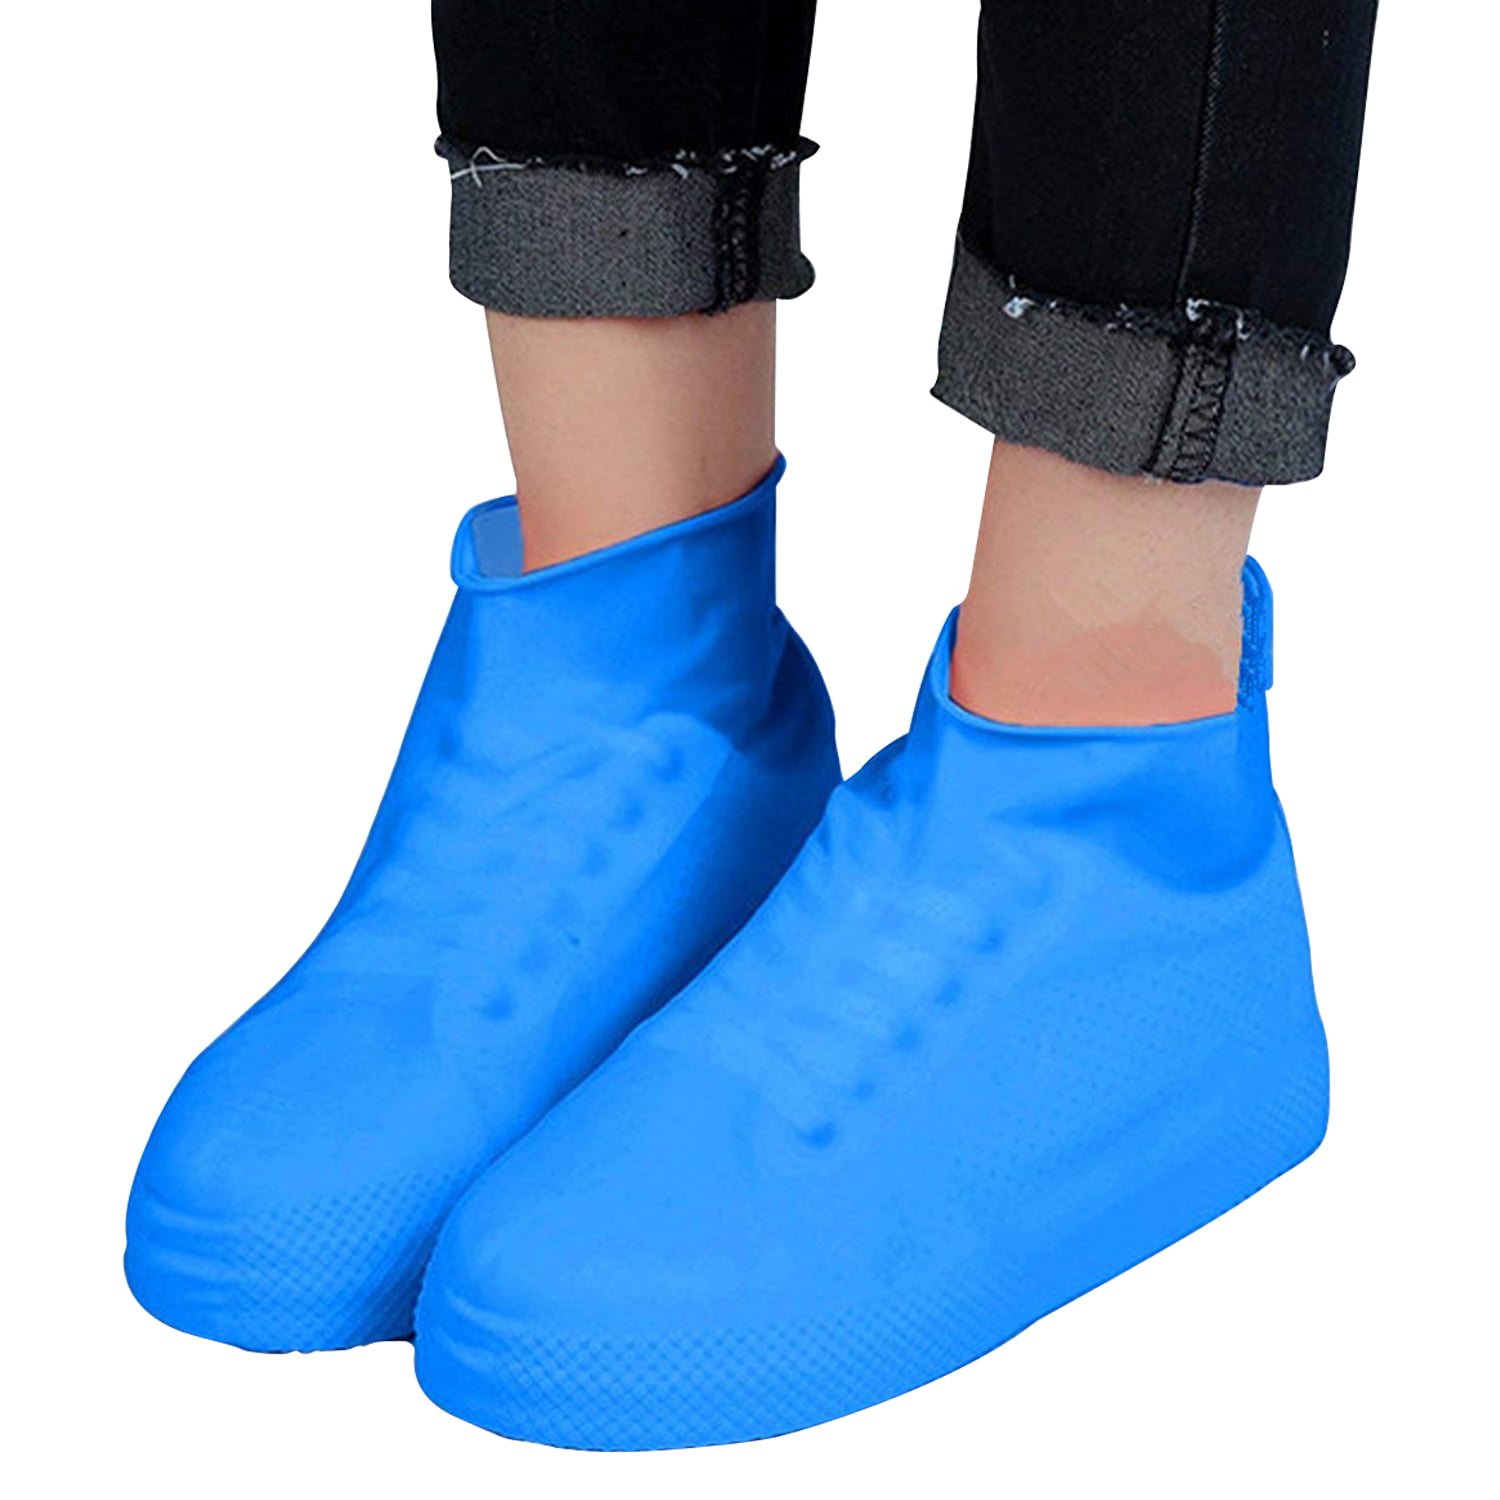 Kids Reusable Latex Waterproof Shoe Covers Slip-Resistant Silicone Rain Boots S 